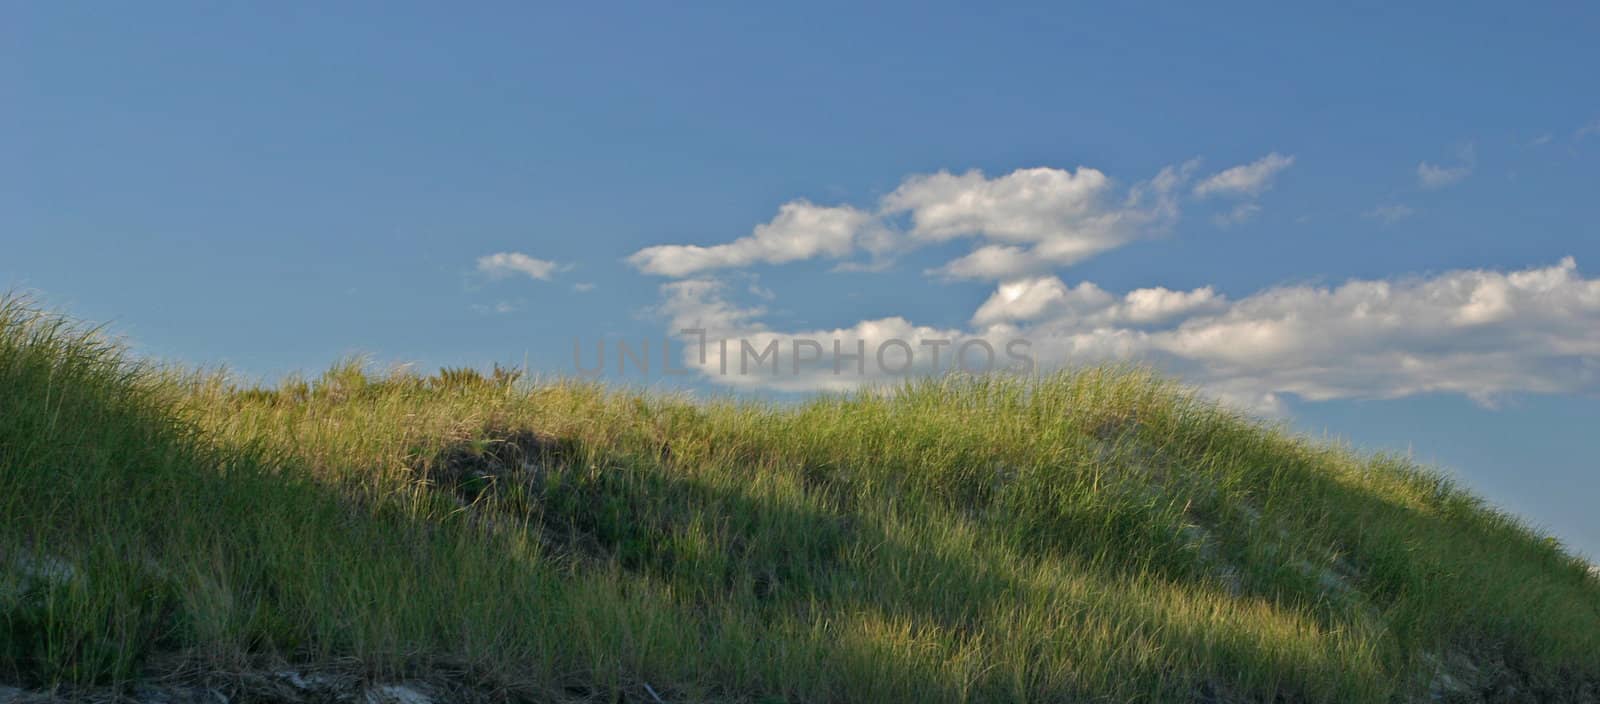 Grass Dunes by fullvision